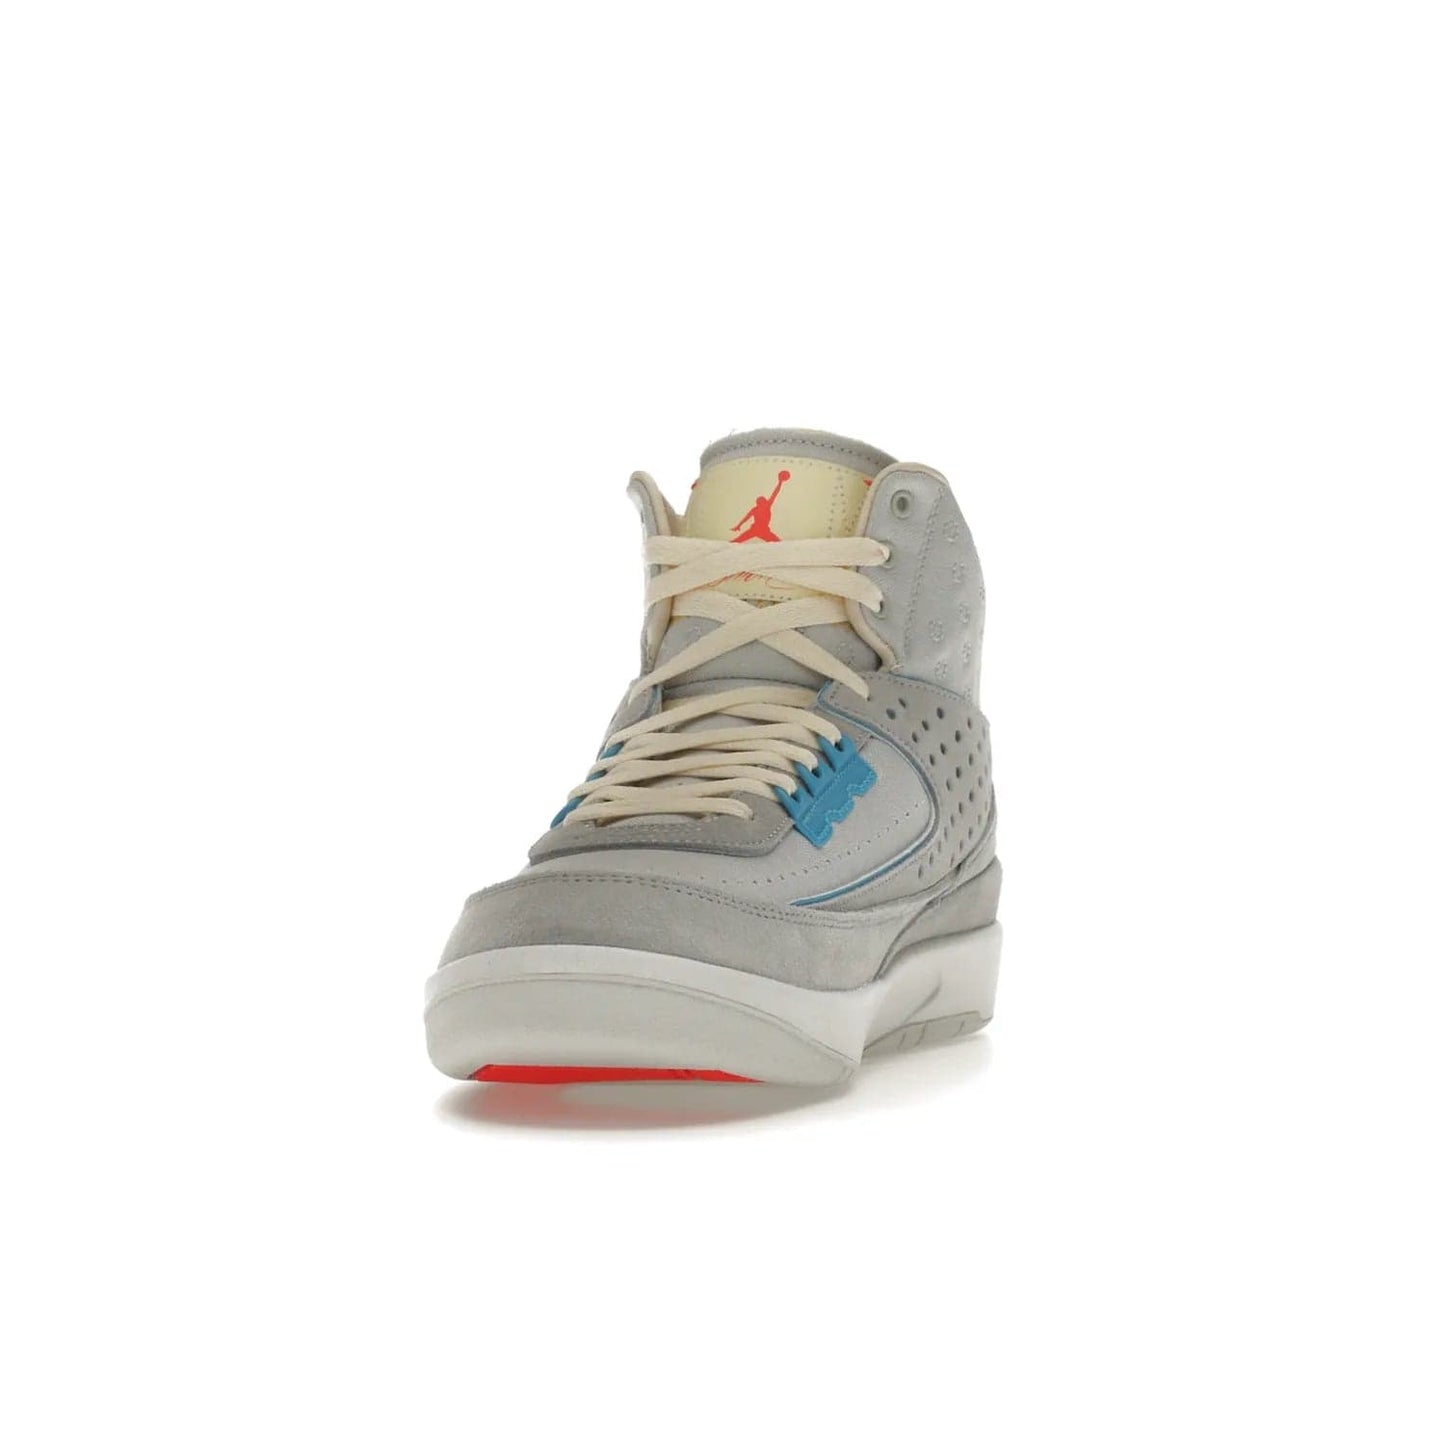 Jordan 2 Retro SP Union Grey Fog - Image 12 - Only at www.BallersClubKickz.com - Introducing the Air Jordan 2 Retro SP Union Grey Fog. This intricate sneaker design features a grey canvas upper with light blue eyelets, eyestay patches, and piping, plus custom external tags. Dropping in April 2022, this exclusive release offers a worn-in look and feel.